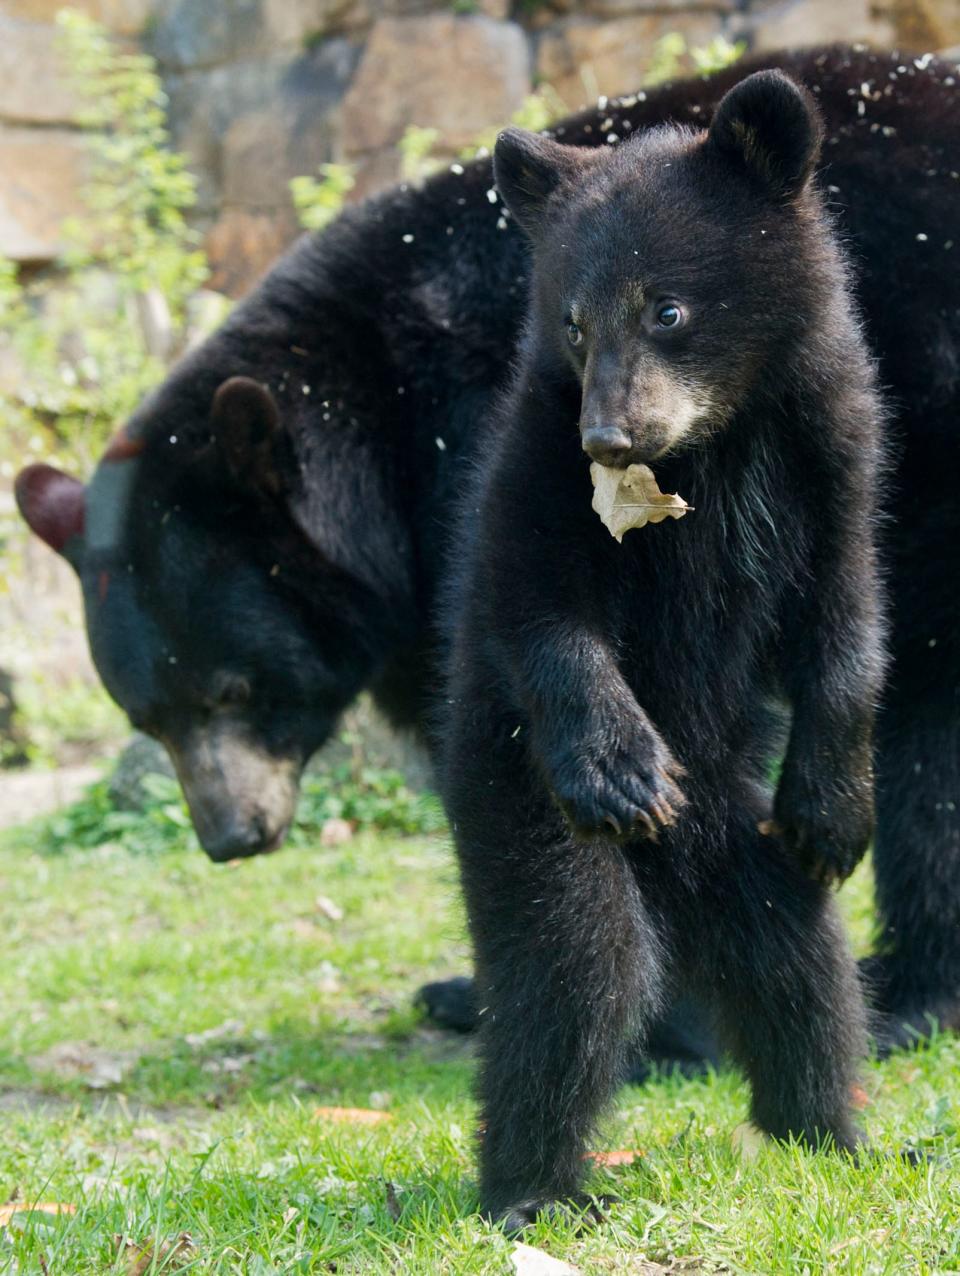 A black bear stands with his mother in the bear enclosure at Tierpark in Berlin, on April 30, 2013.